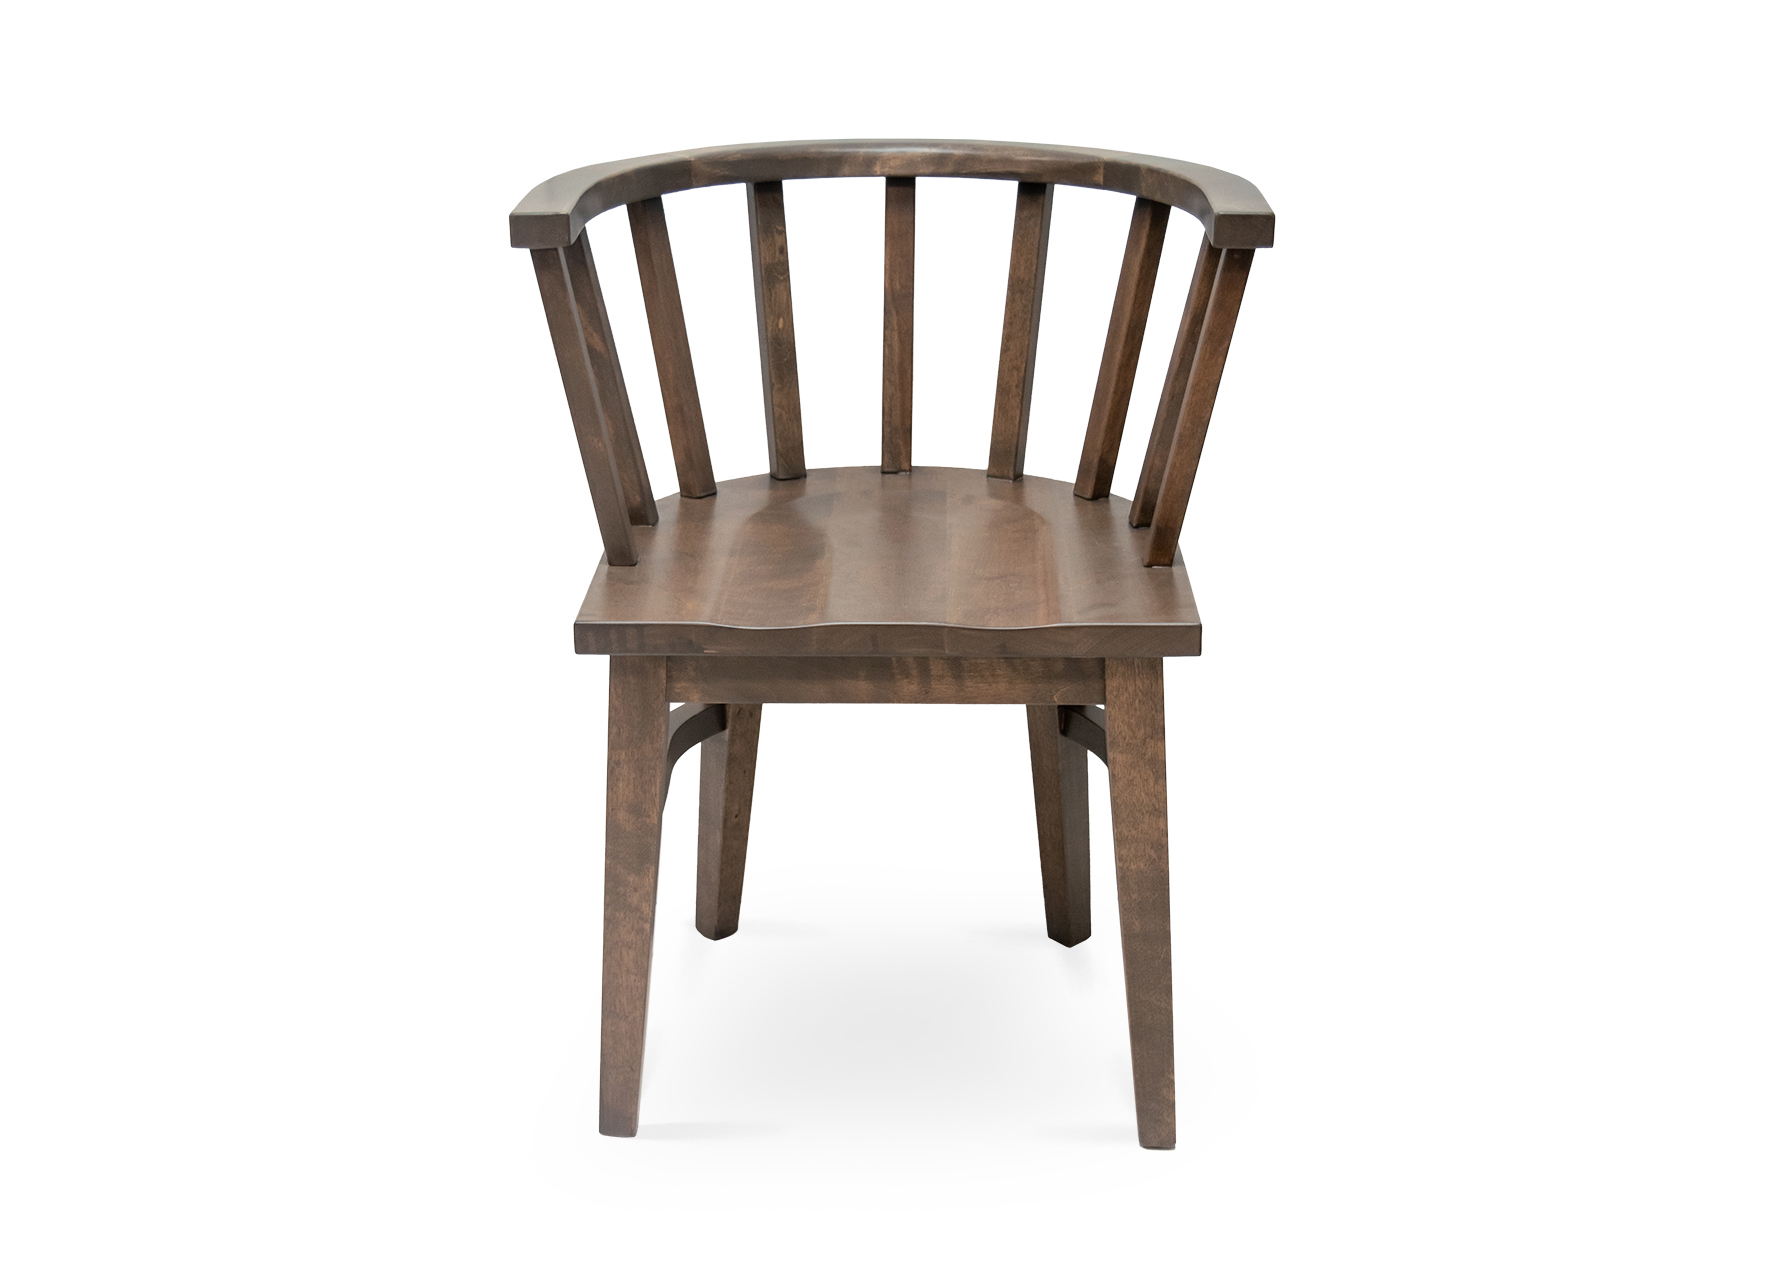 Oakland Wood Saddle Chair - F